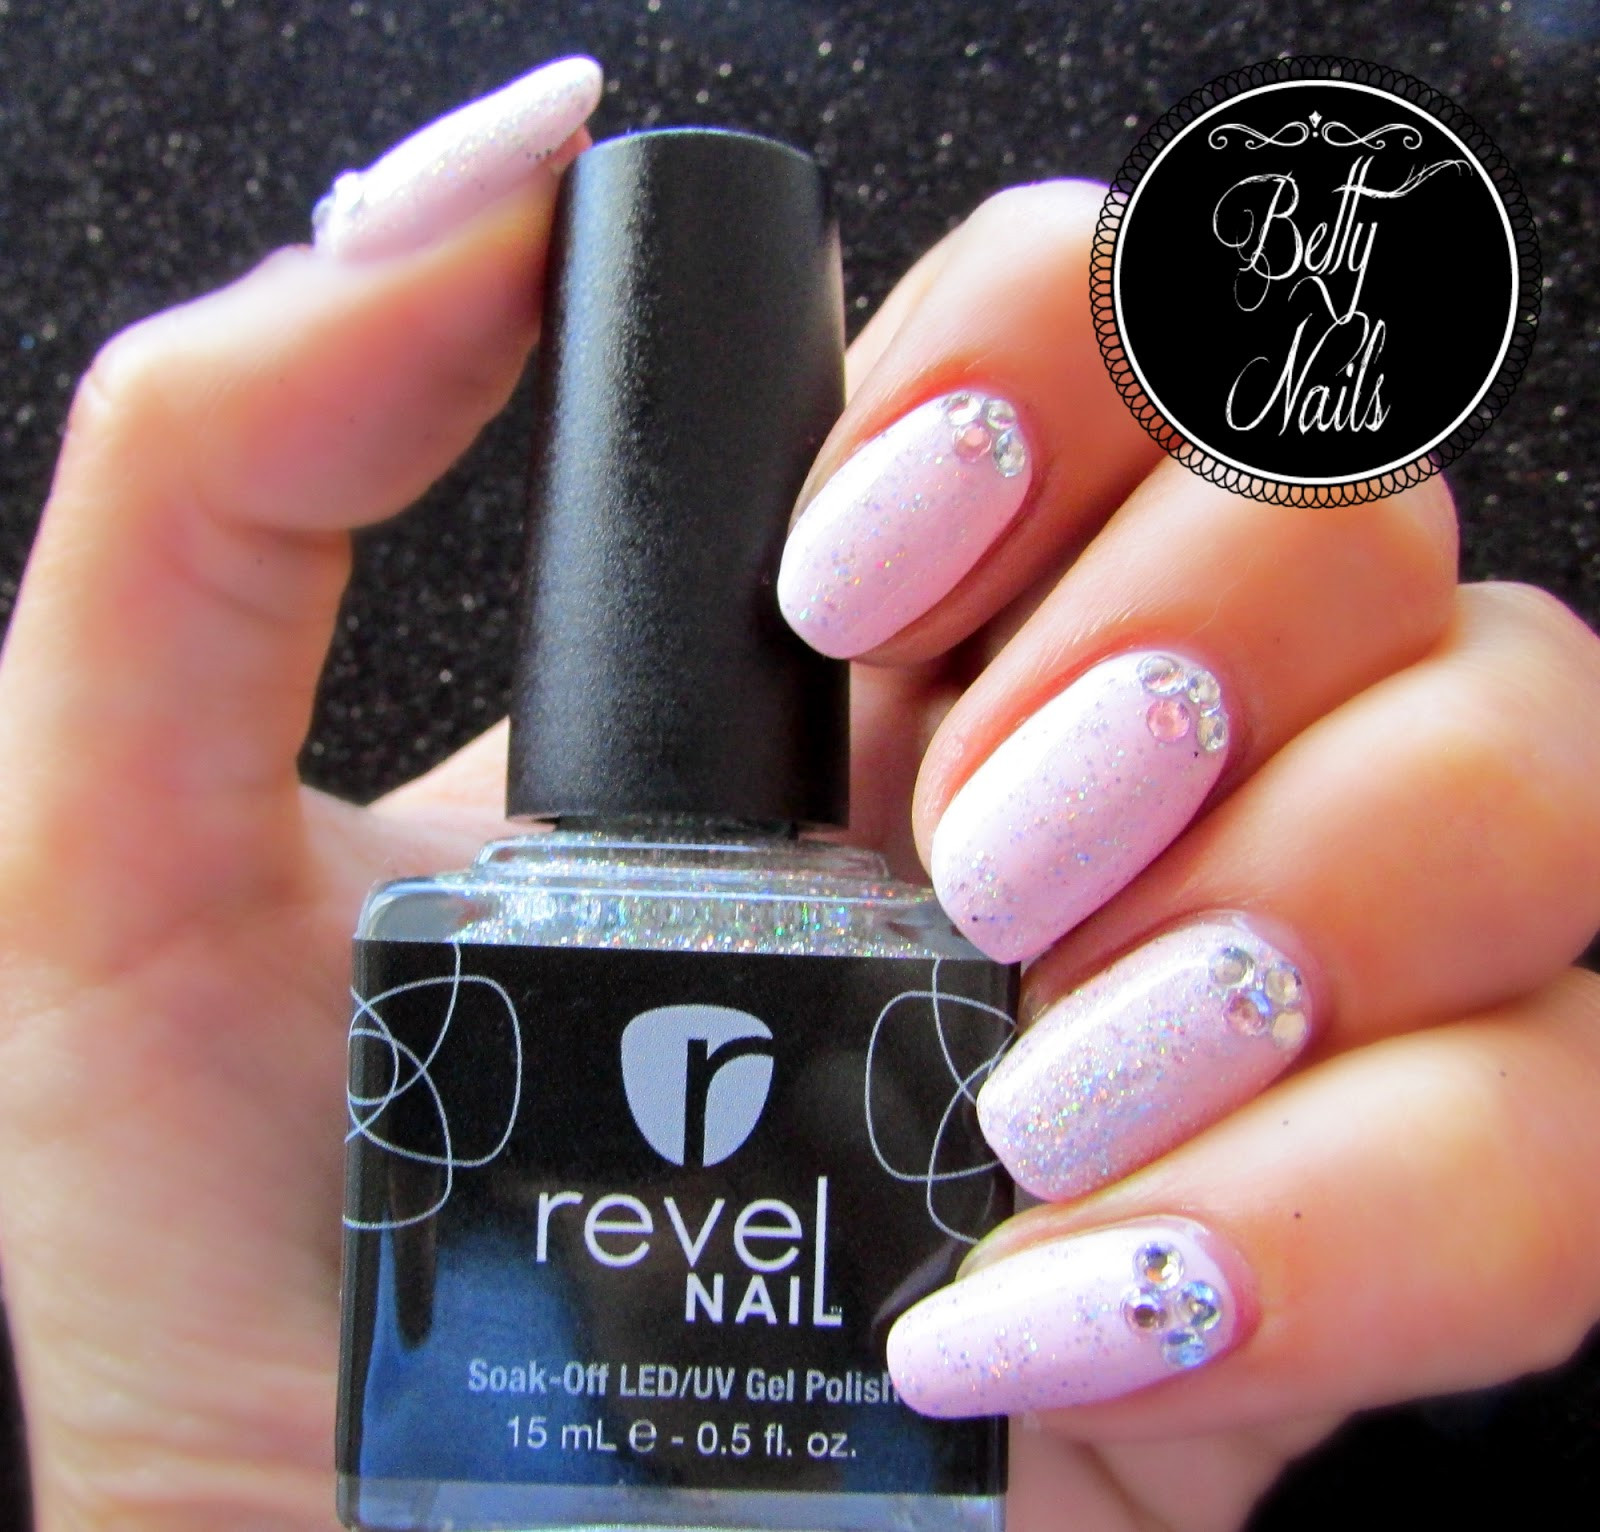 Revel Nail Colors
 Betty Nails Revel Nail Swatches and Review